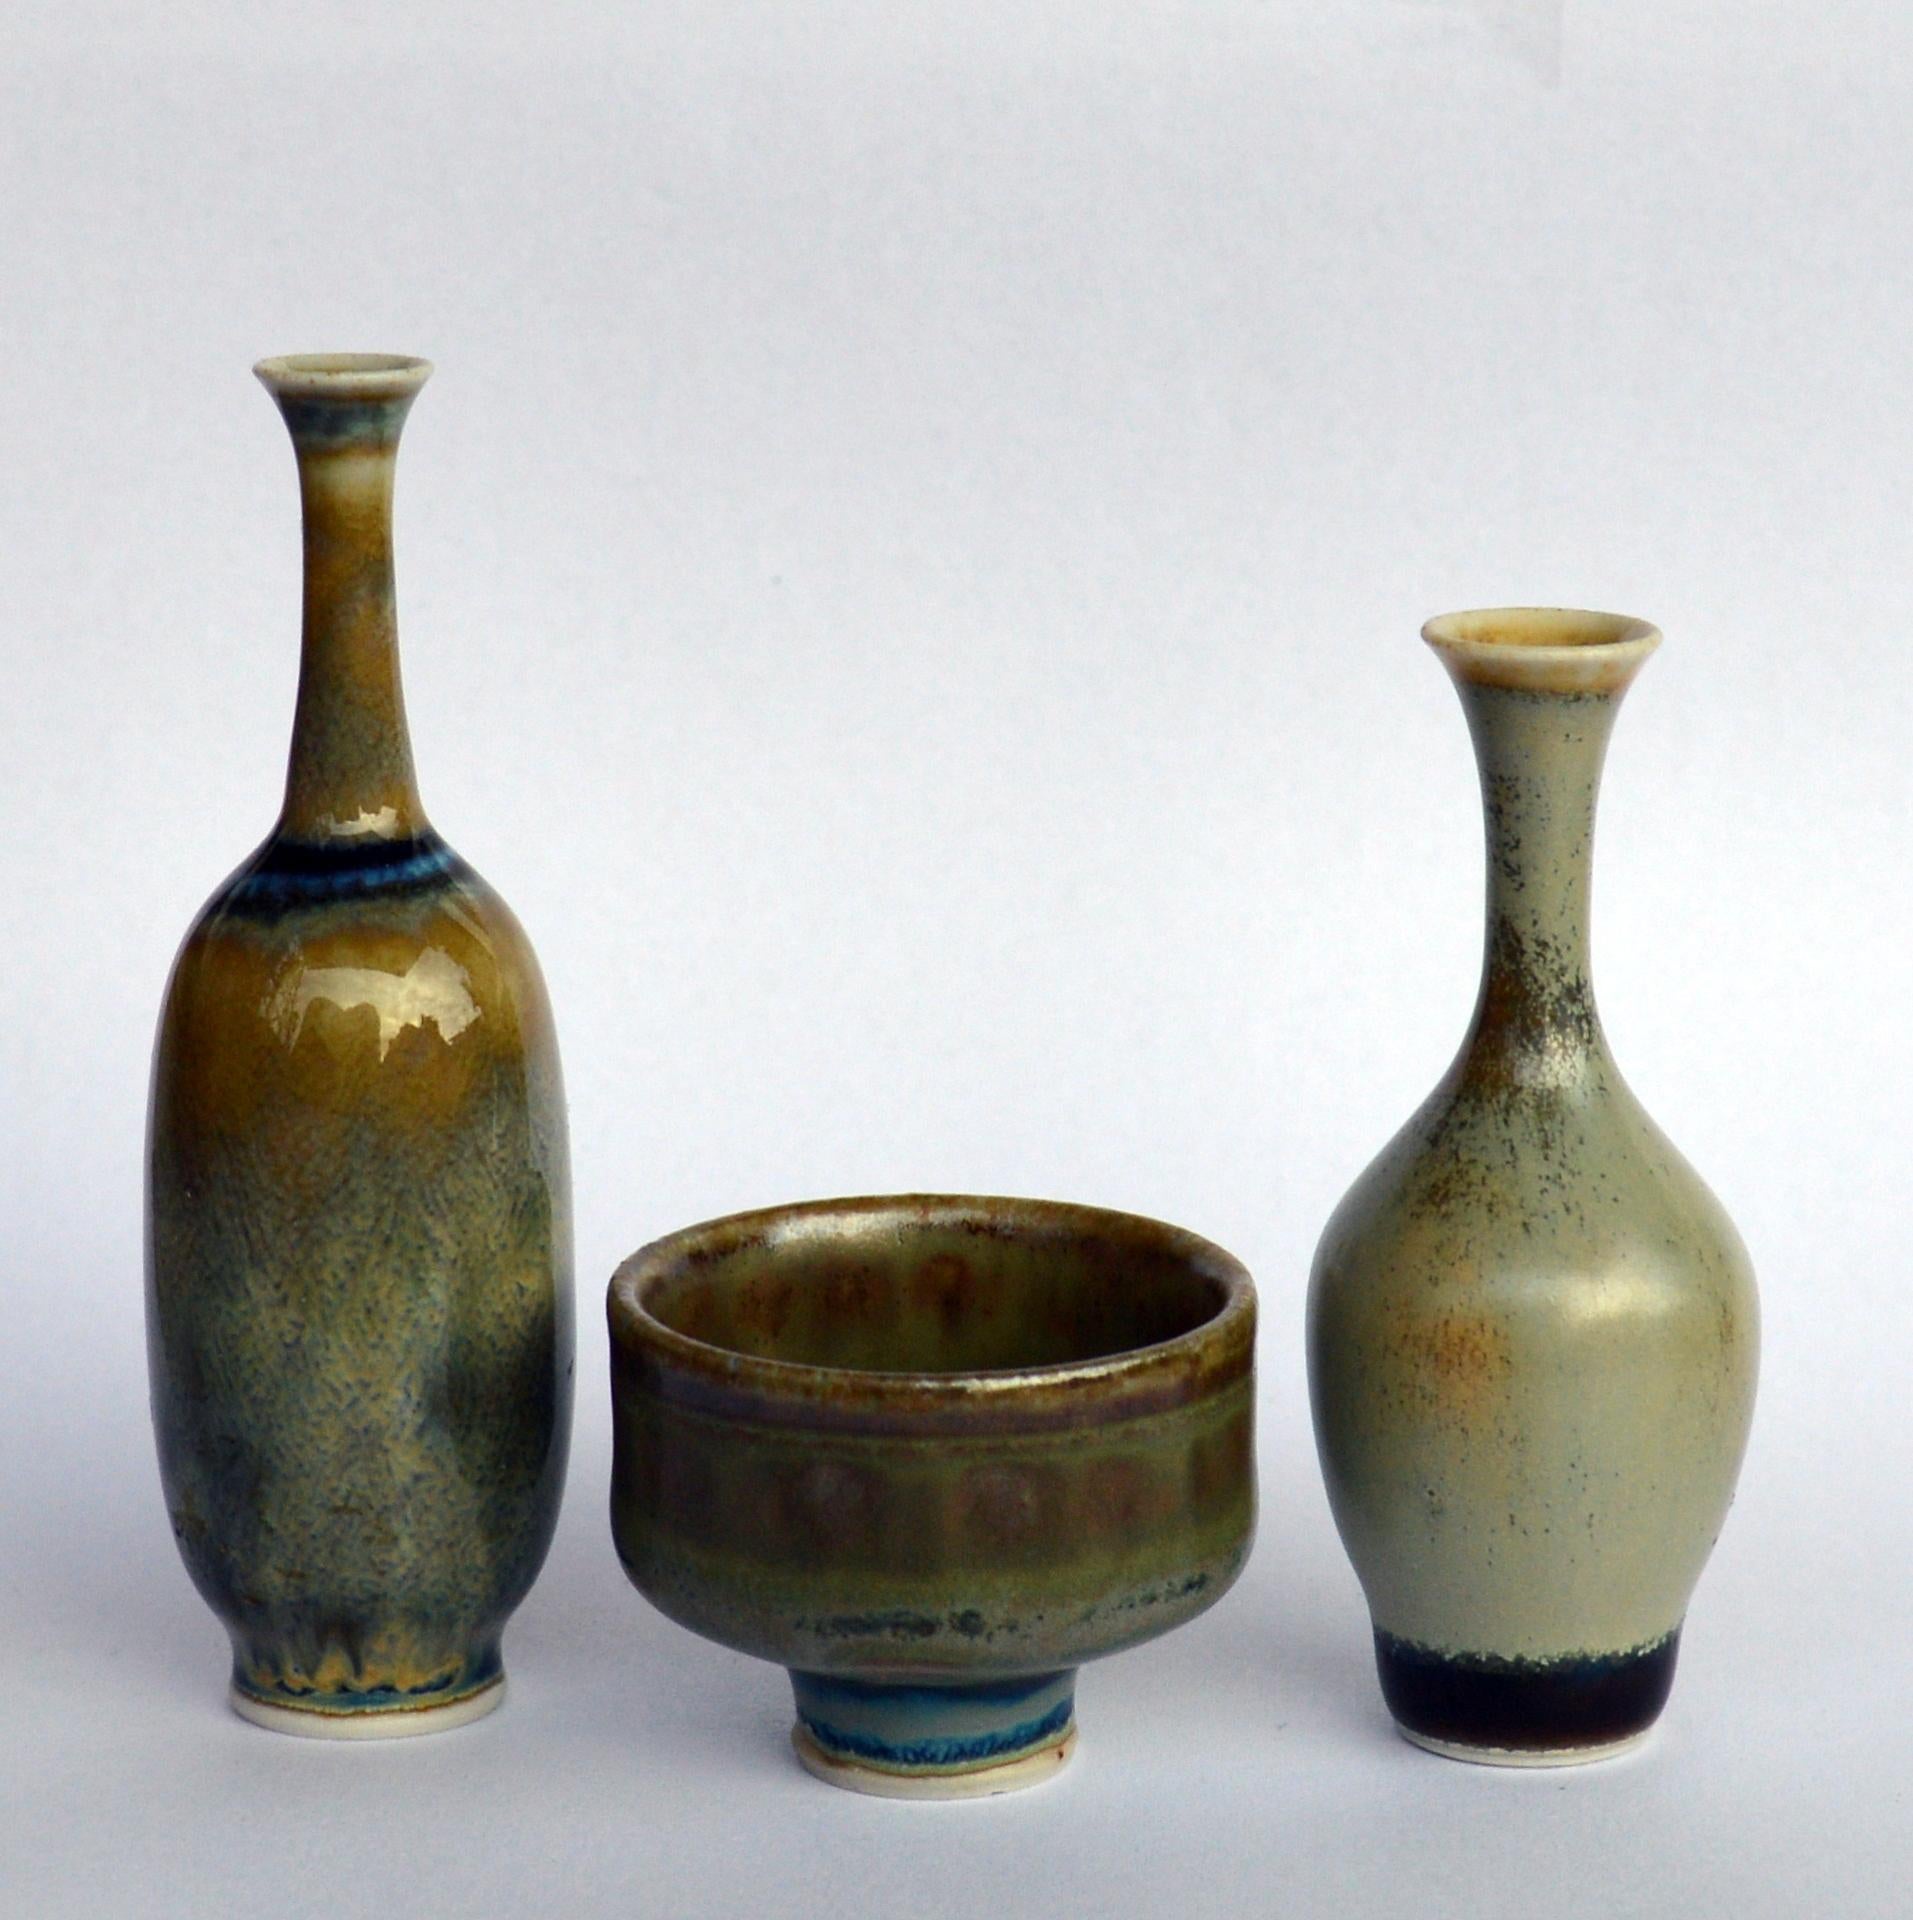 Wonderful collection of miniature ceramics. These ones are the work of John Andersson, signed ”JA”, and produced at Höganäs in Sweden. There are two vases and one bowl. The sculpture forms are amazing as well as the glaze. Measures: tallest vase are